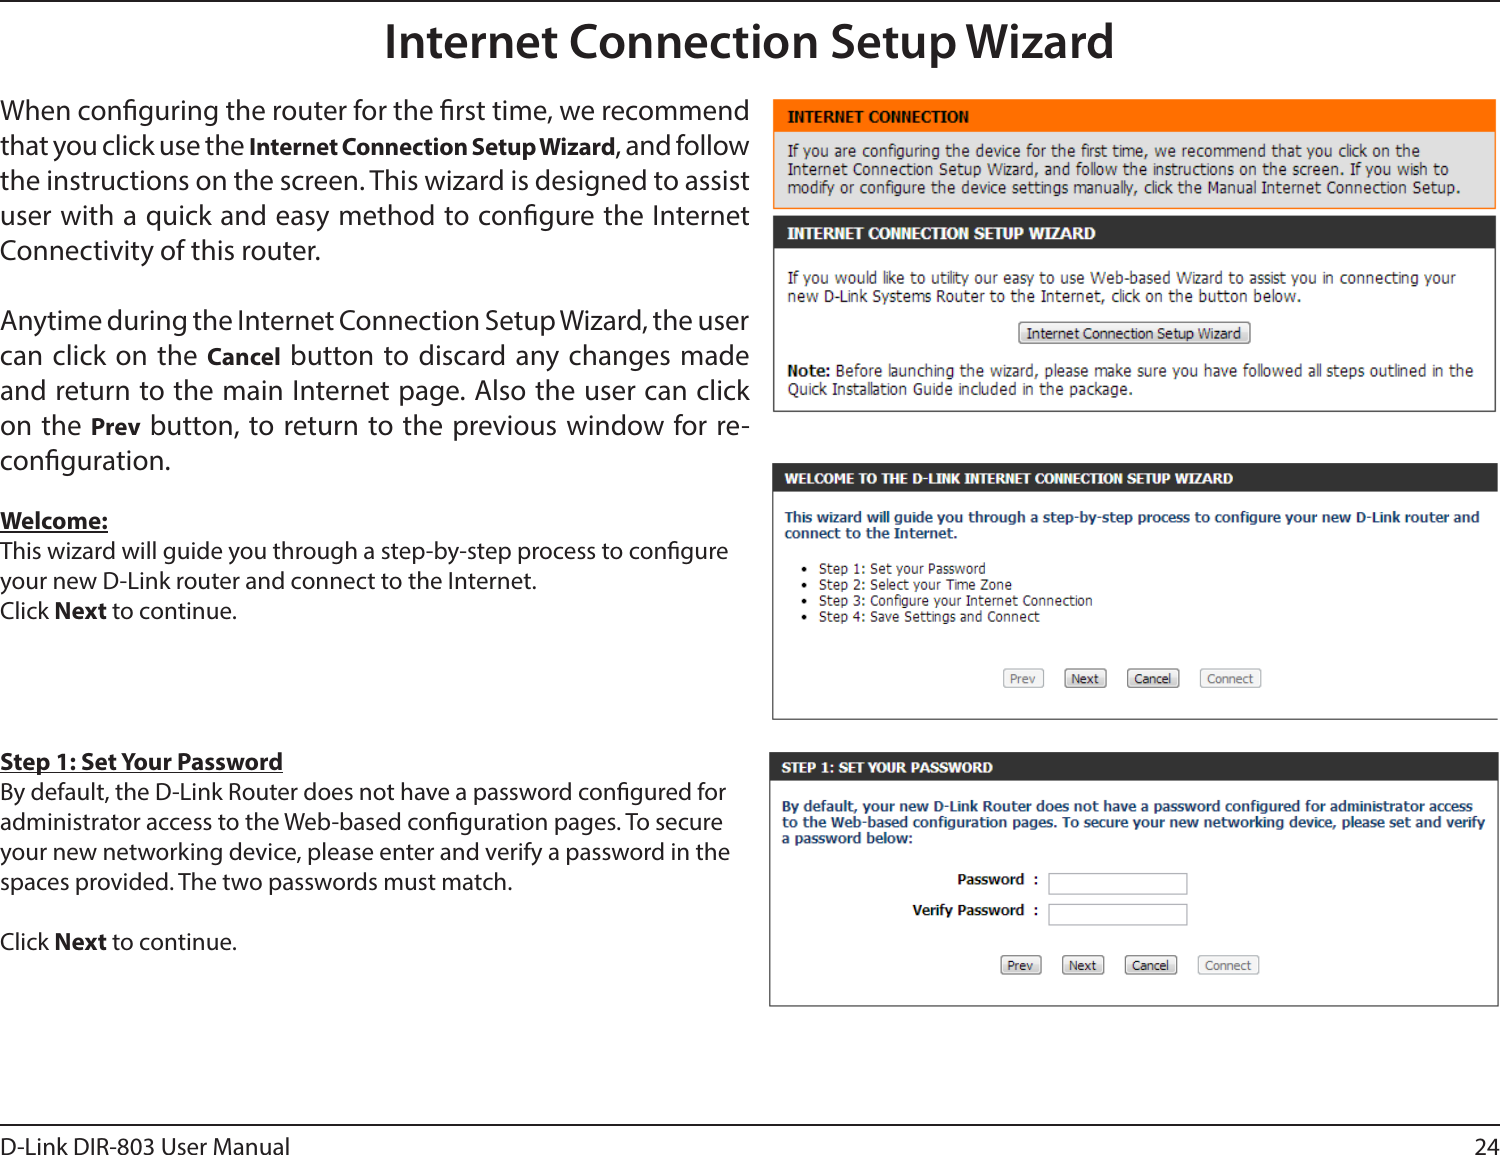 24D-Link DIR-803 User ManualInternet Connection Setup WizardWhen conguring the router for the rst time, we recommend that you click use the Internet Connection Setup Wizard, and follow the instructions on the screen. This wizard is designed to assist user with a quick and easy method to congure the Internet Connectivity of this router.Anytime during the Internet Connection Setup Wizard, the user can click on the Cancel button to discard any changes made and return to the main Internet page. Also the user can click on the Prev button, to return to the previous window for re-conguration.Welcome:This wizard will guide you through a step-by-step process to congure your new D-Link router and connect to the Internet. Click Next to continue.Step 1: Set Your PasswordBy default, the D-Link Router does not have a password congured for administrator access to the Web-based conguration pages. To secure your new networking device, please enter and verify a password in the spaces provided. The two passwords must match.Click Next to continue.